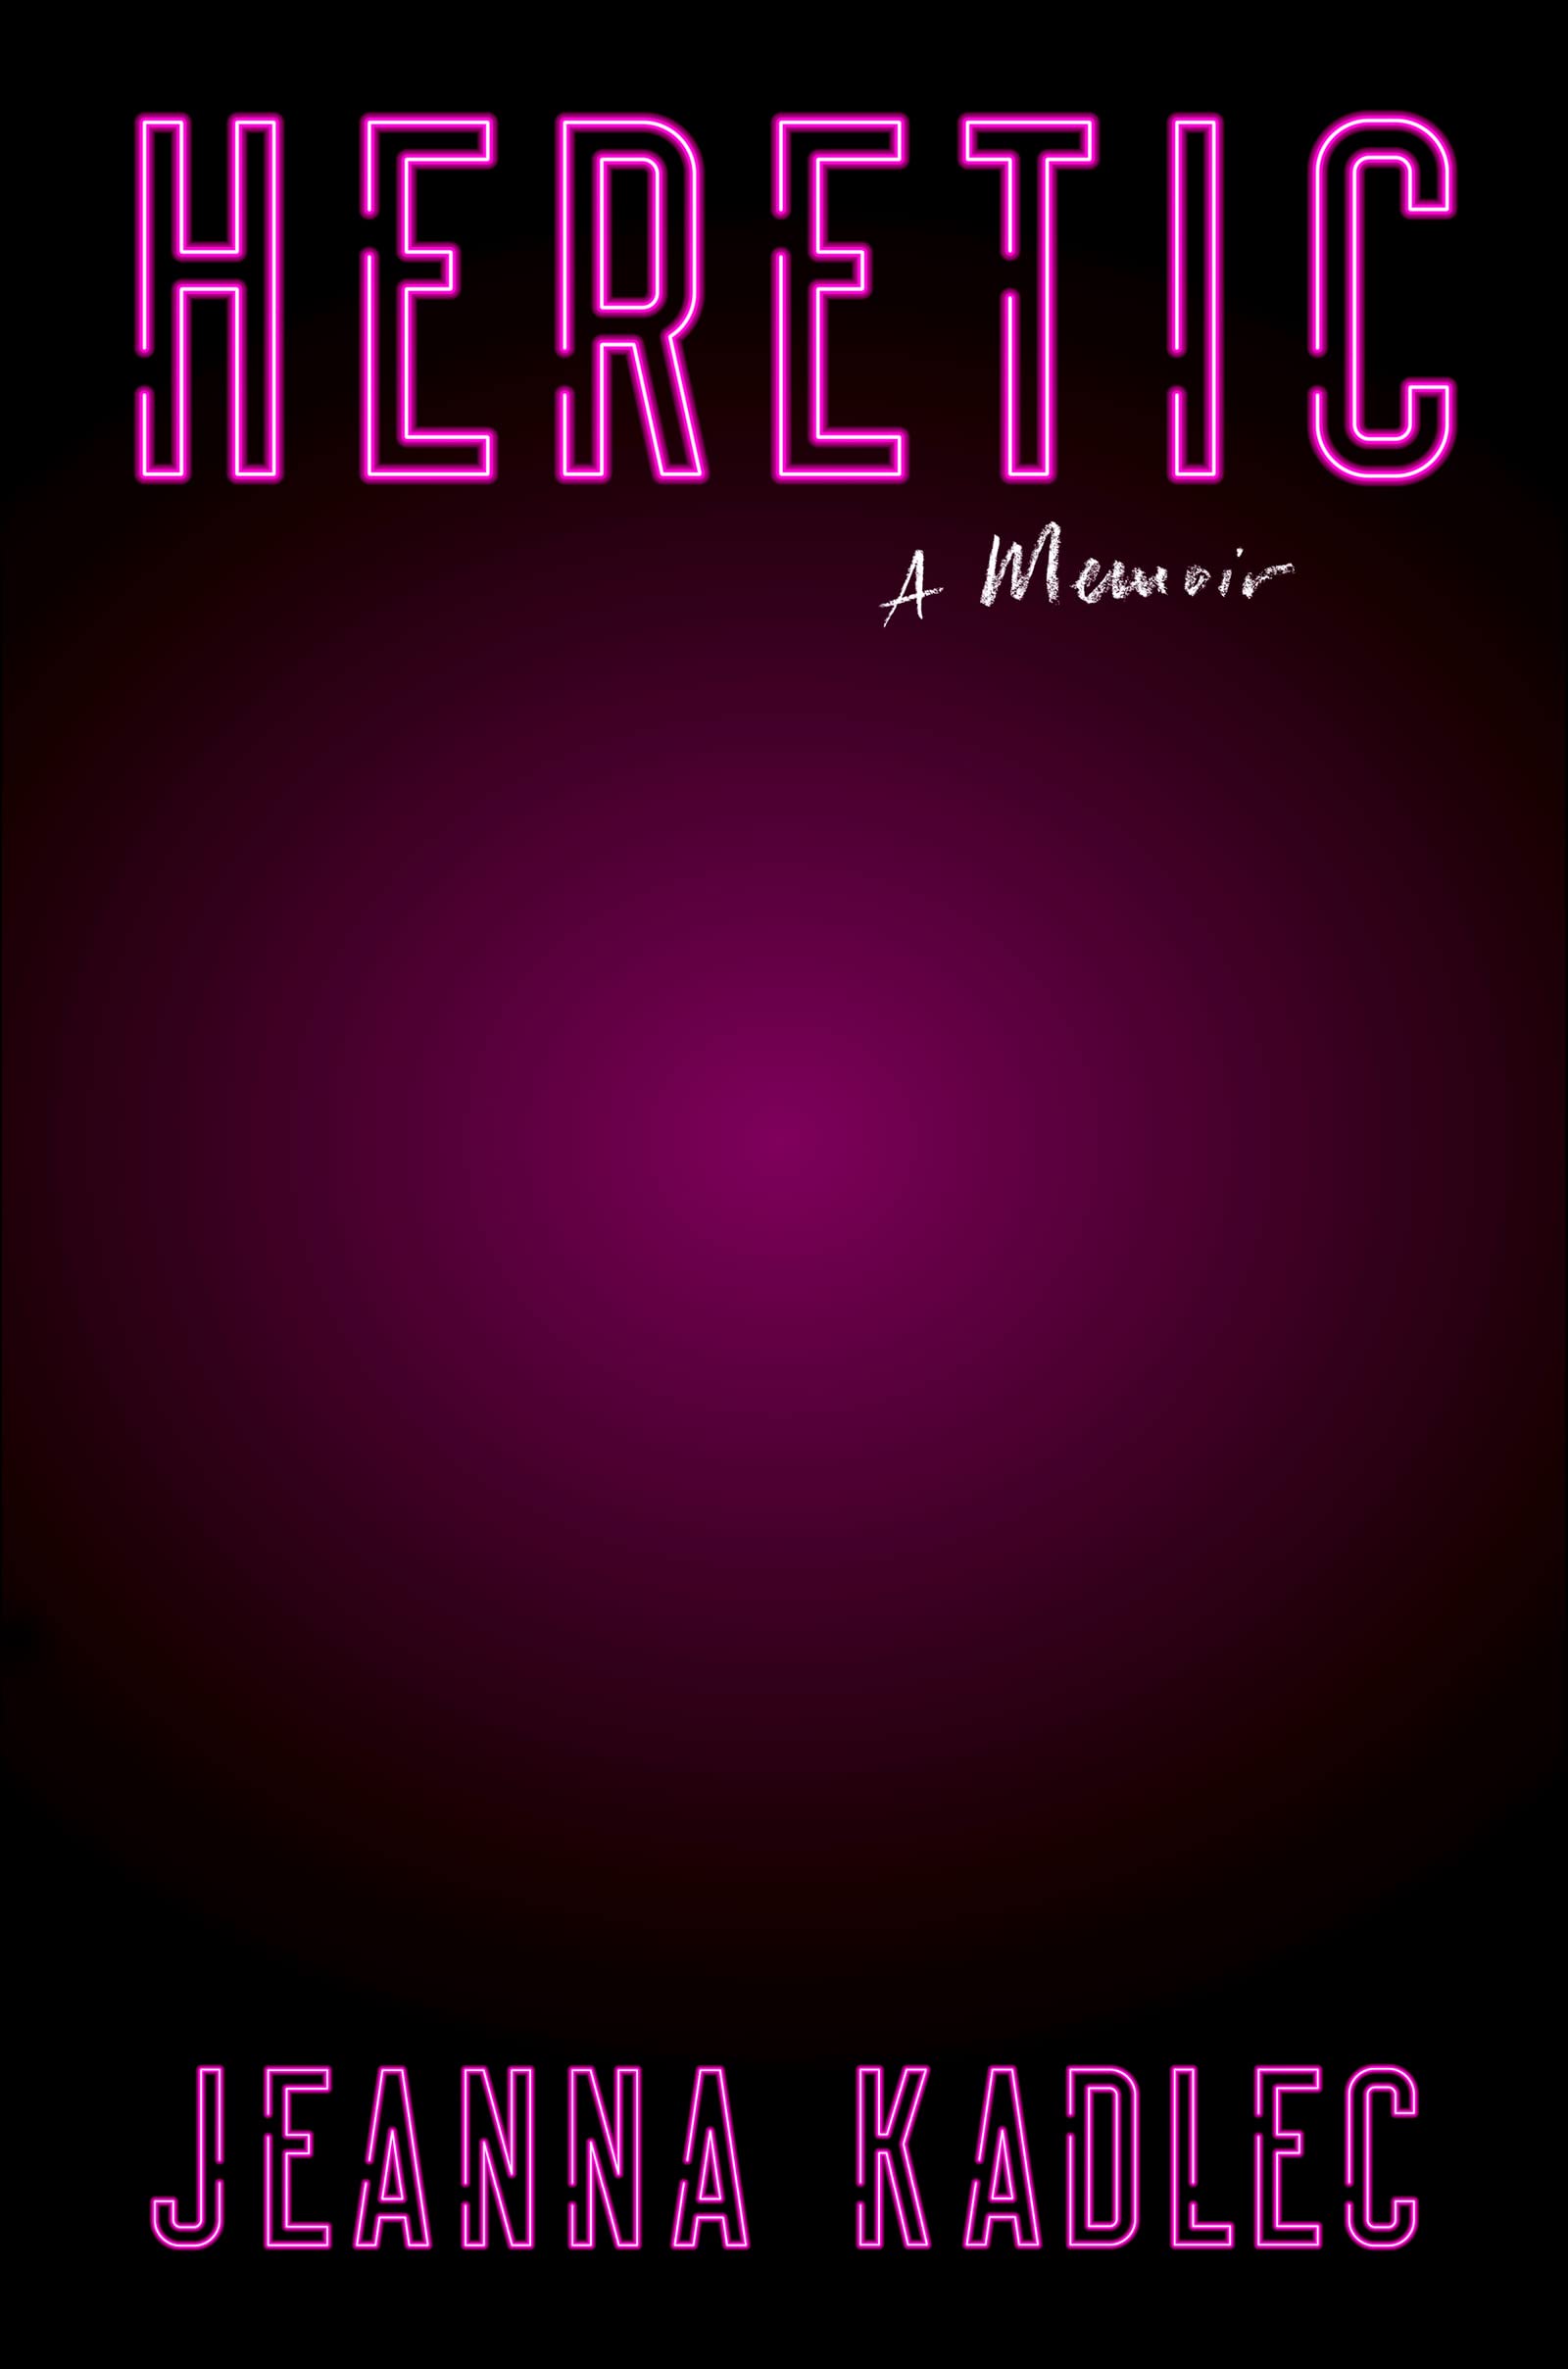 A graphic of the cover of Heretic by Jeanna Kadlec